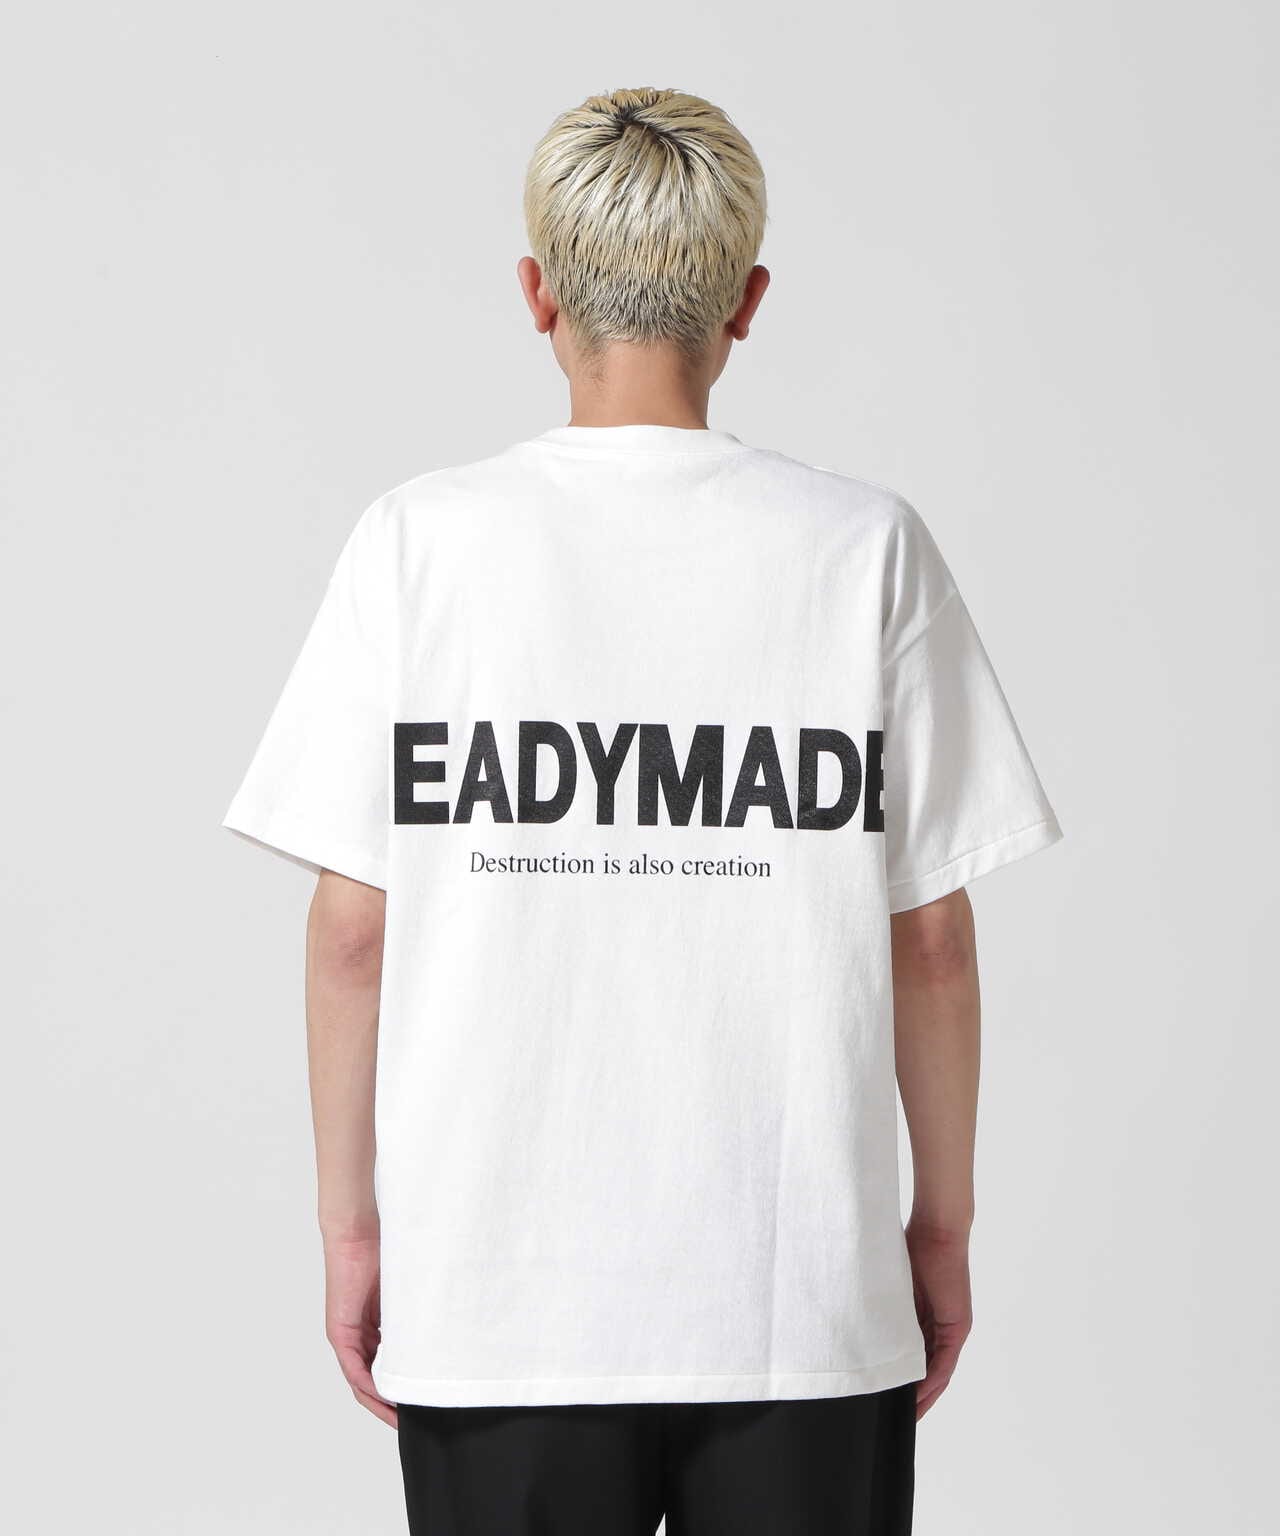 READYMADE SMILE S/S T-SHIRT | www.innoveering.net